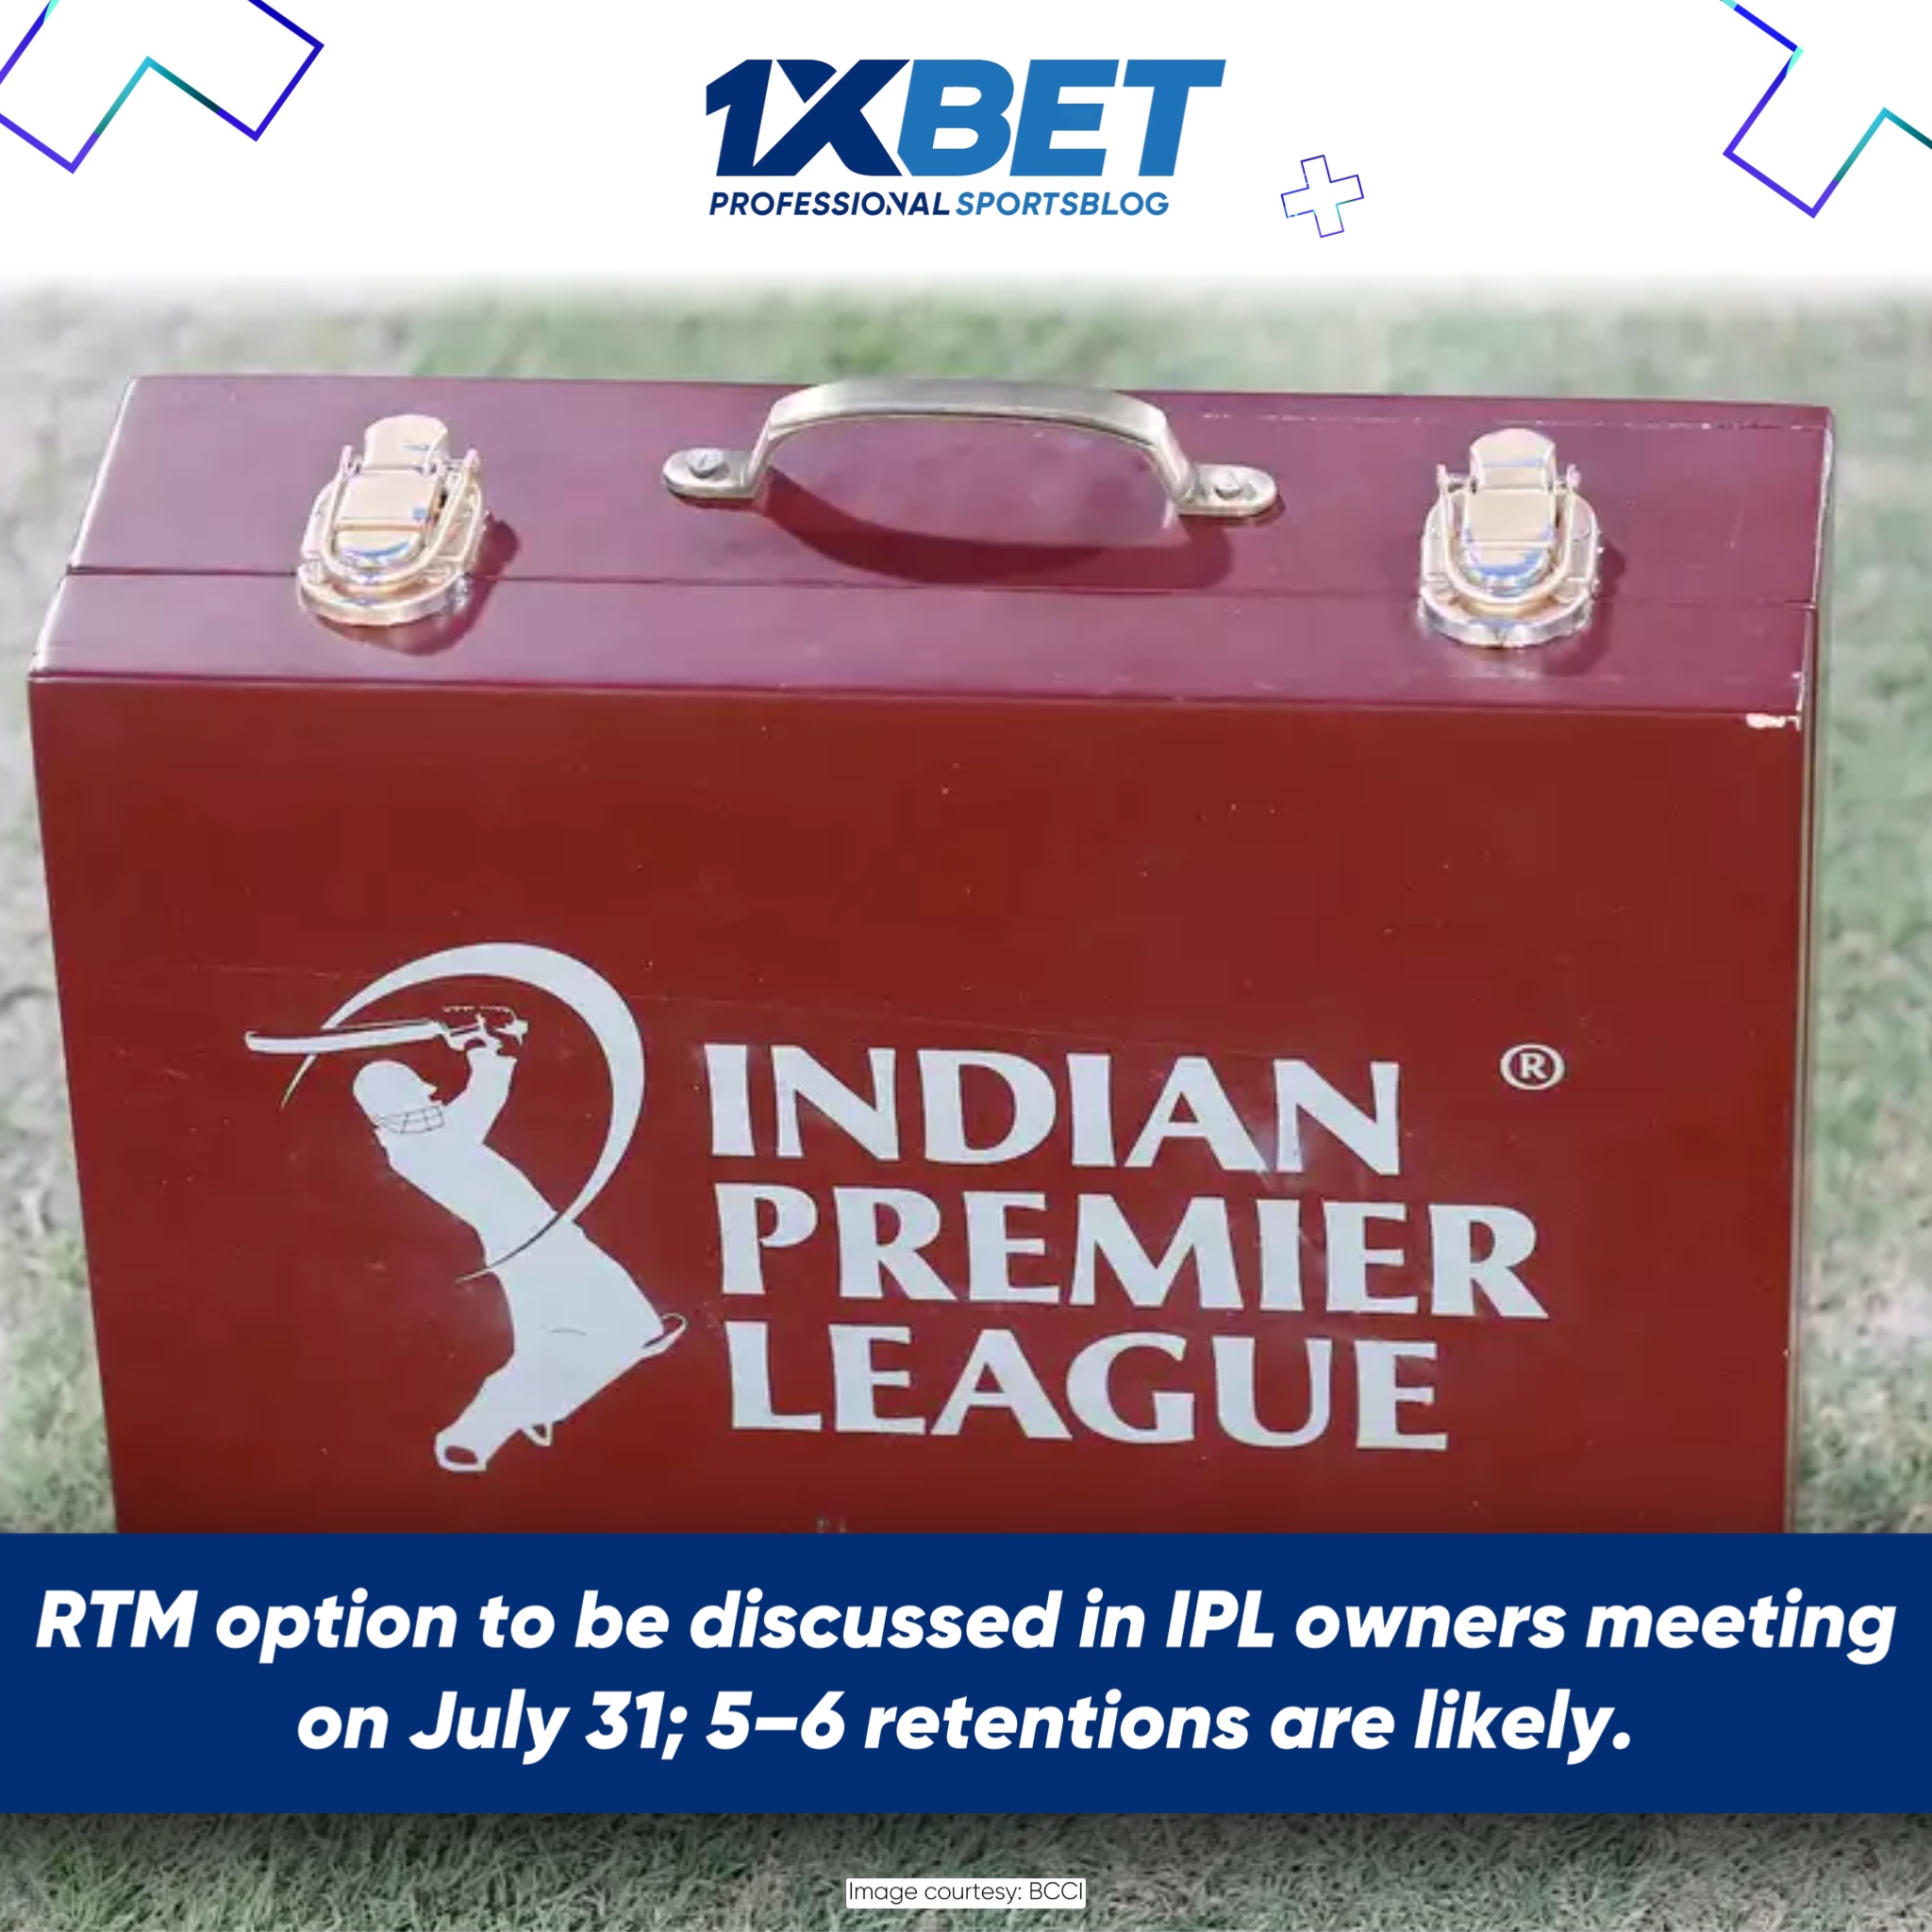 BCCI and IPL Franchise Owners Meet-Up Confirmed: A Comprehensive Discussion on Player Retentions and RTMs